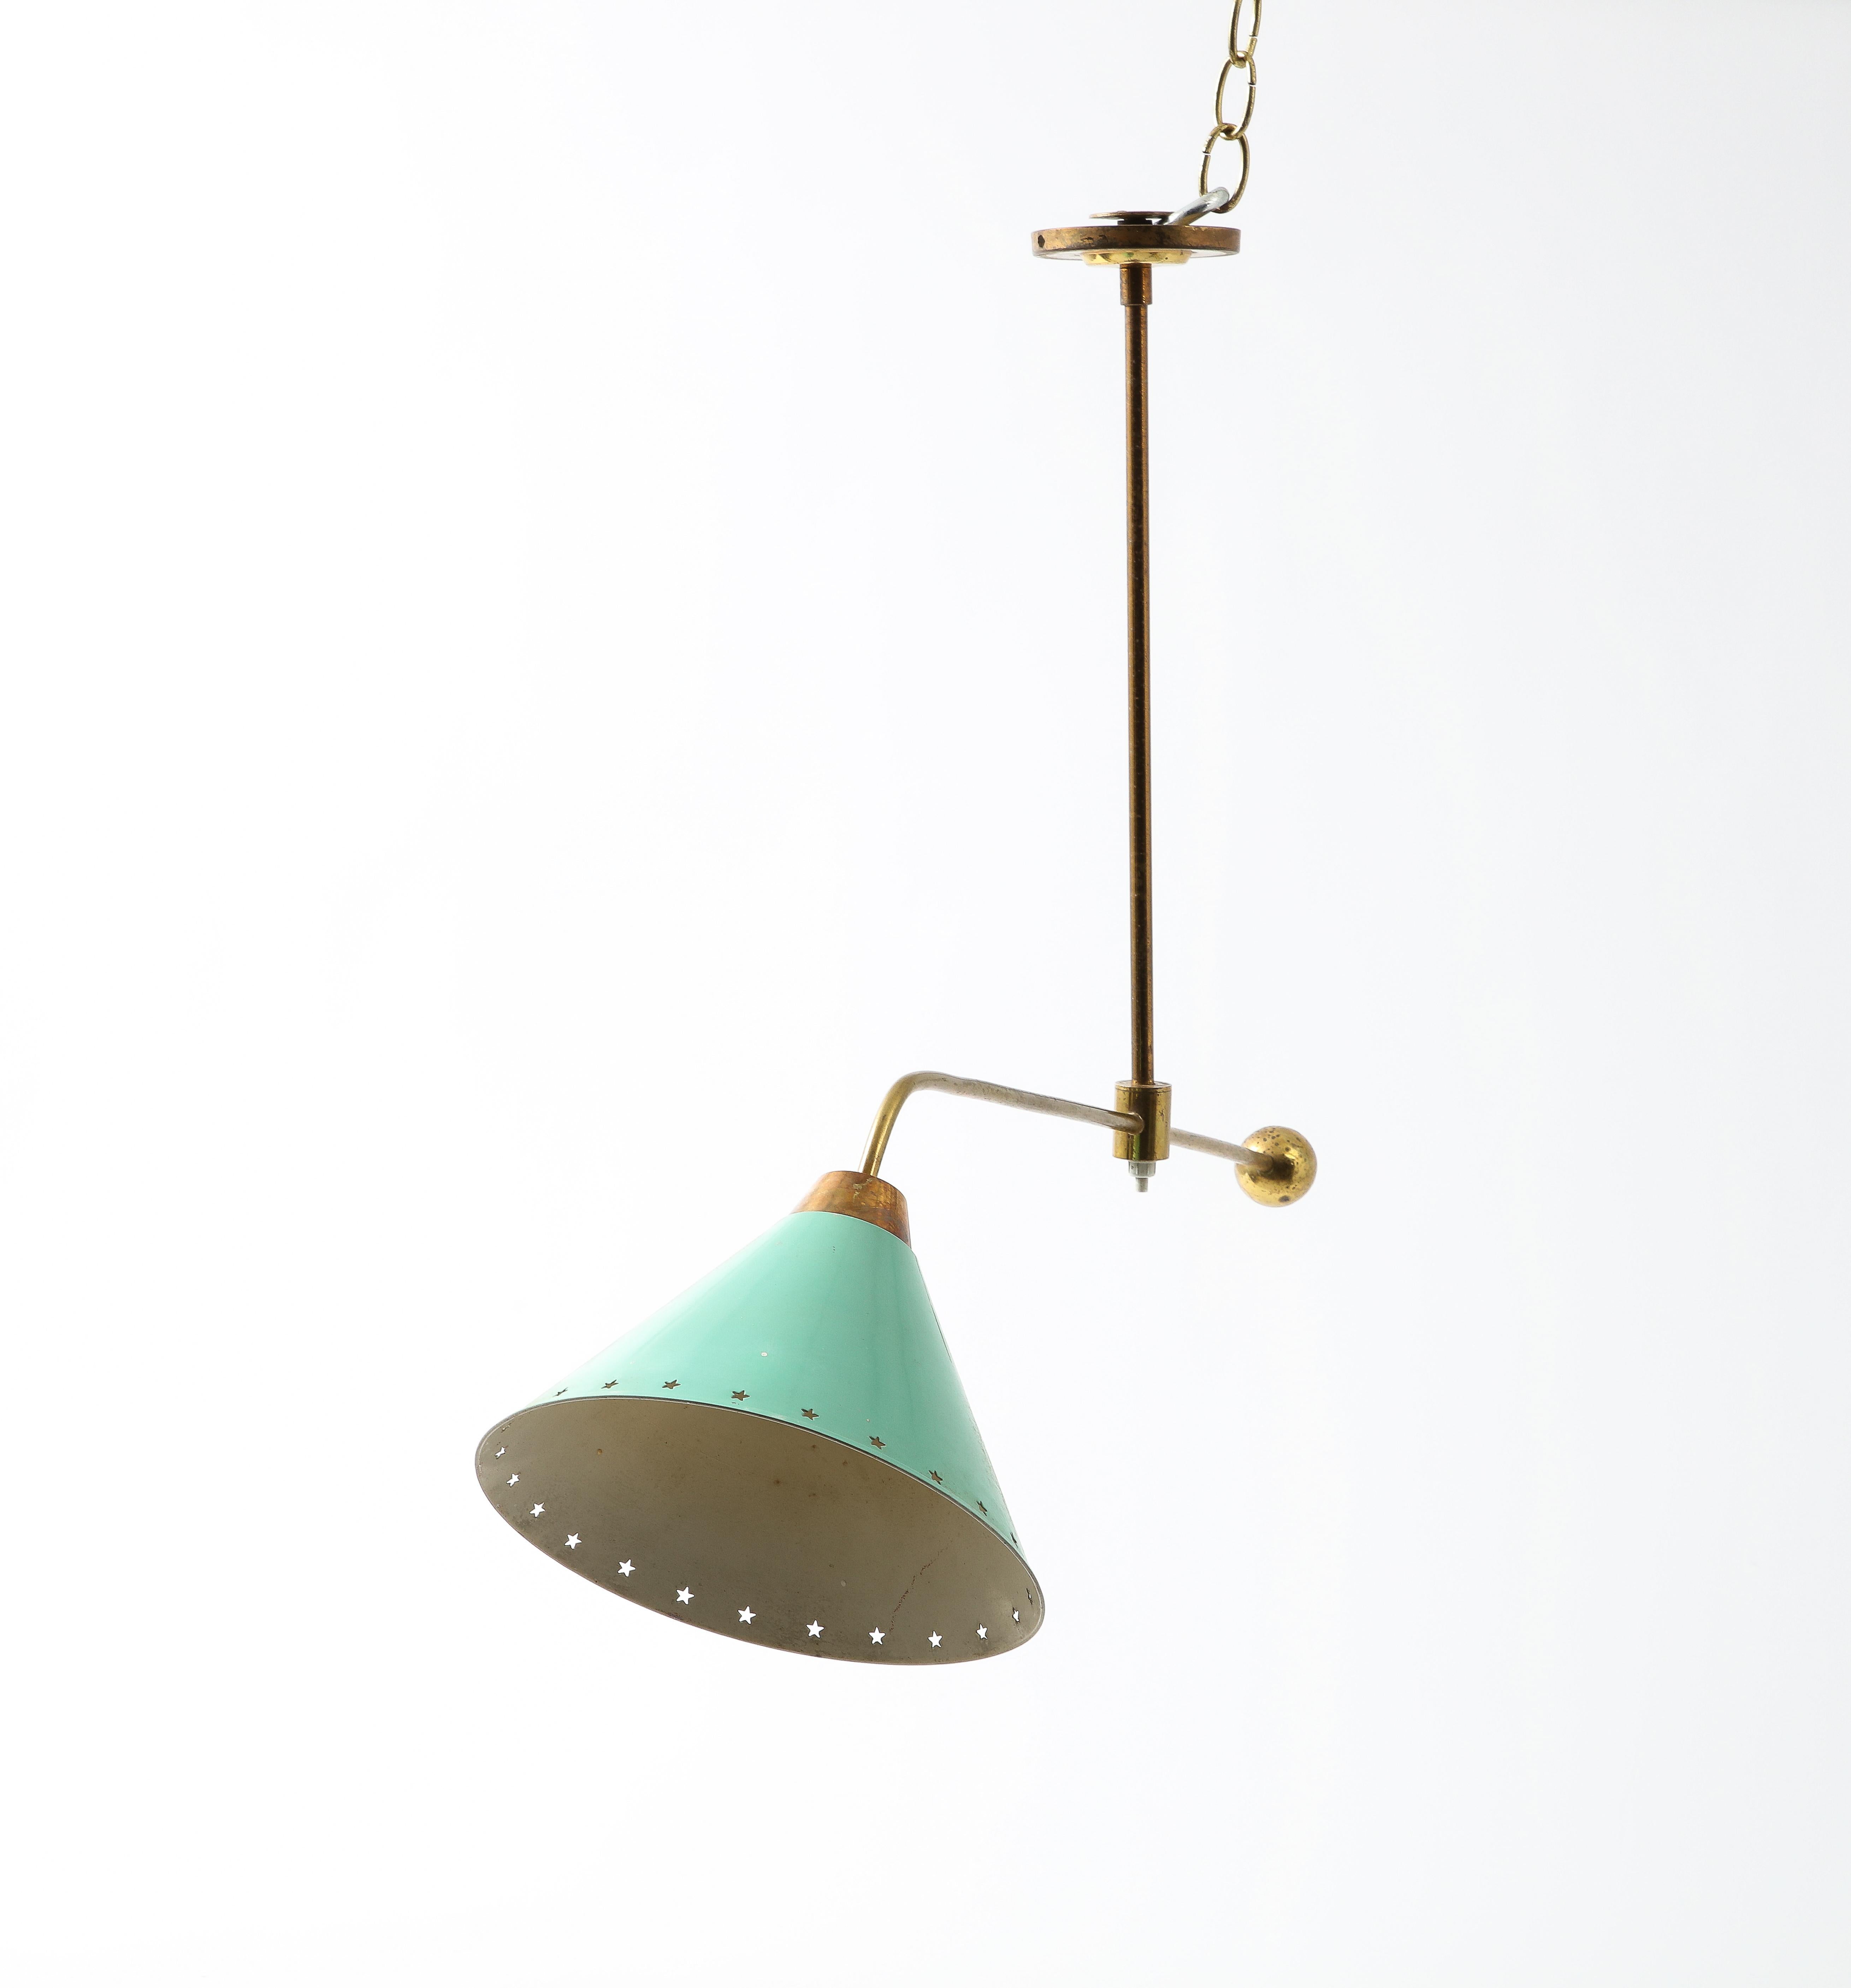 Arlus Brass Asymmetrical Ceiling Fixture with Green Shade, France 1960's For Sale 2